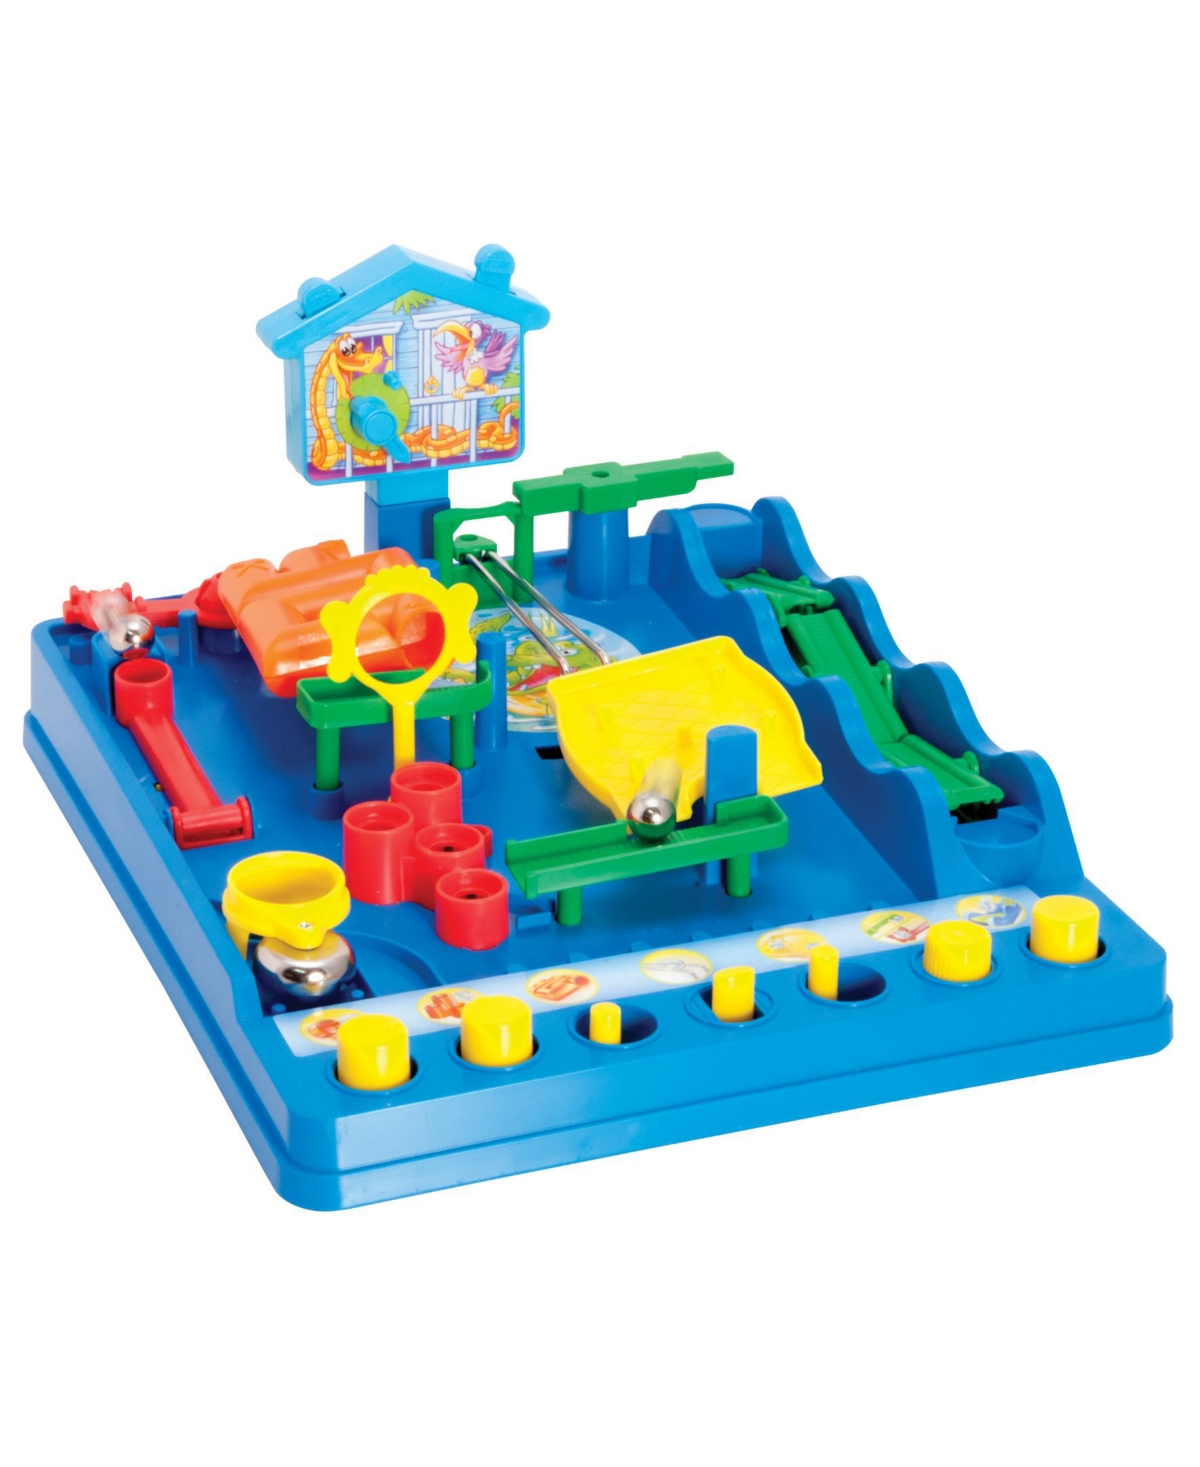 Masterpieces Puzzles Tomy Toys Screwball Scramble In Multi